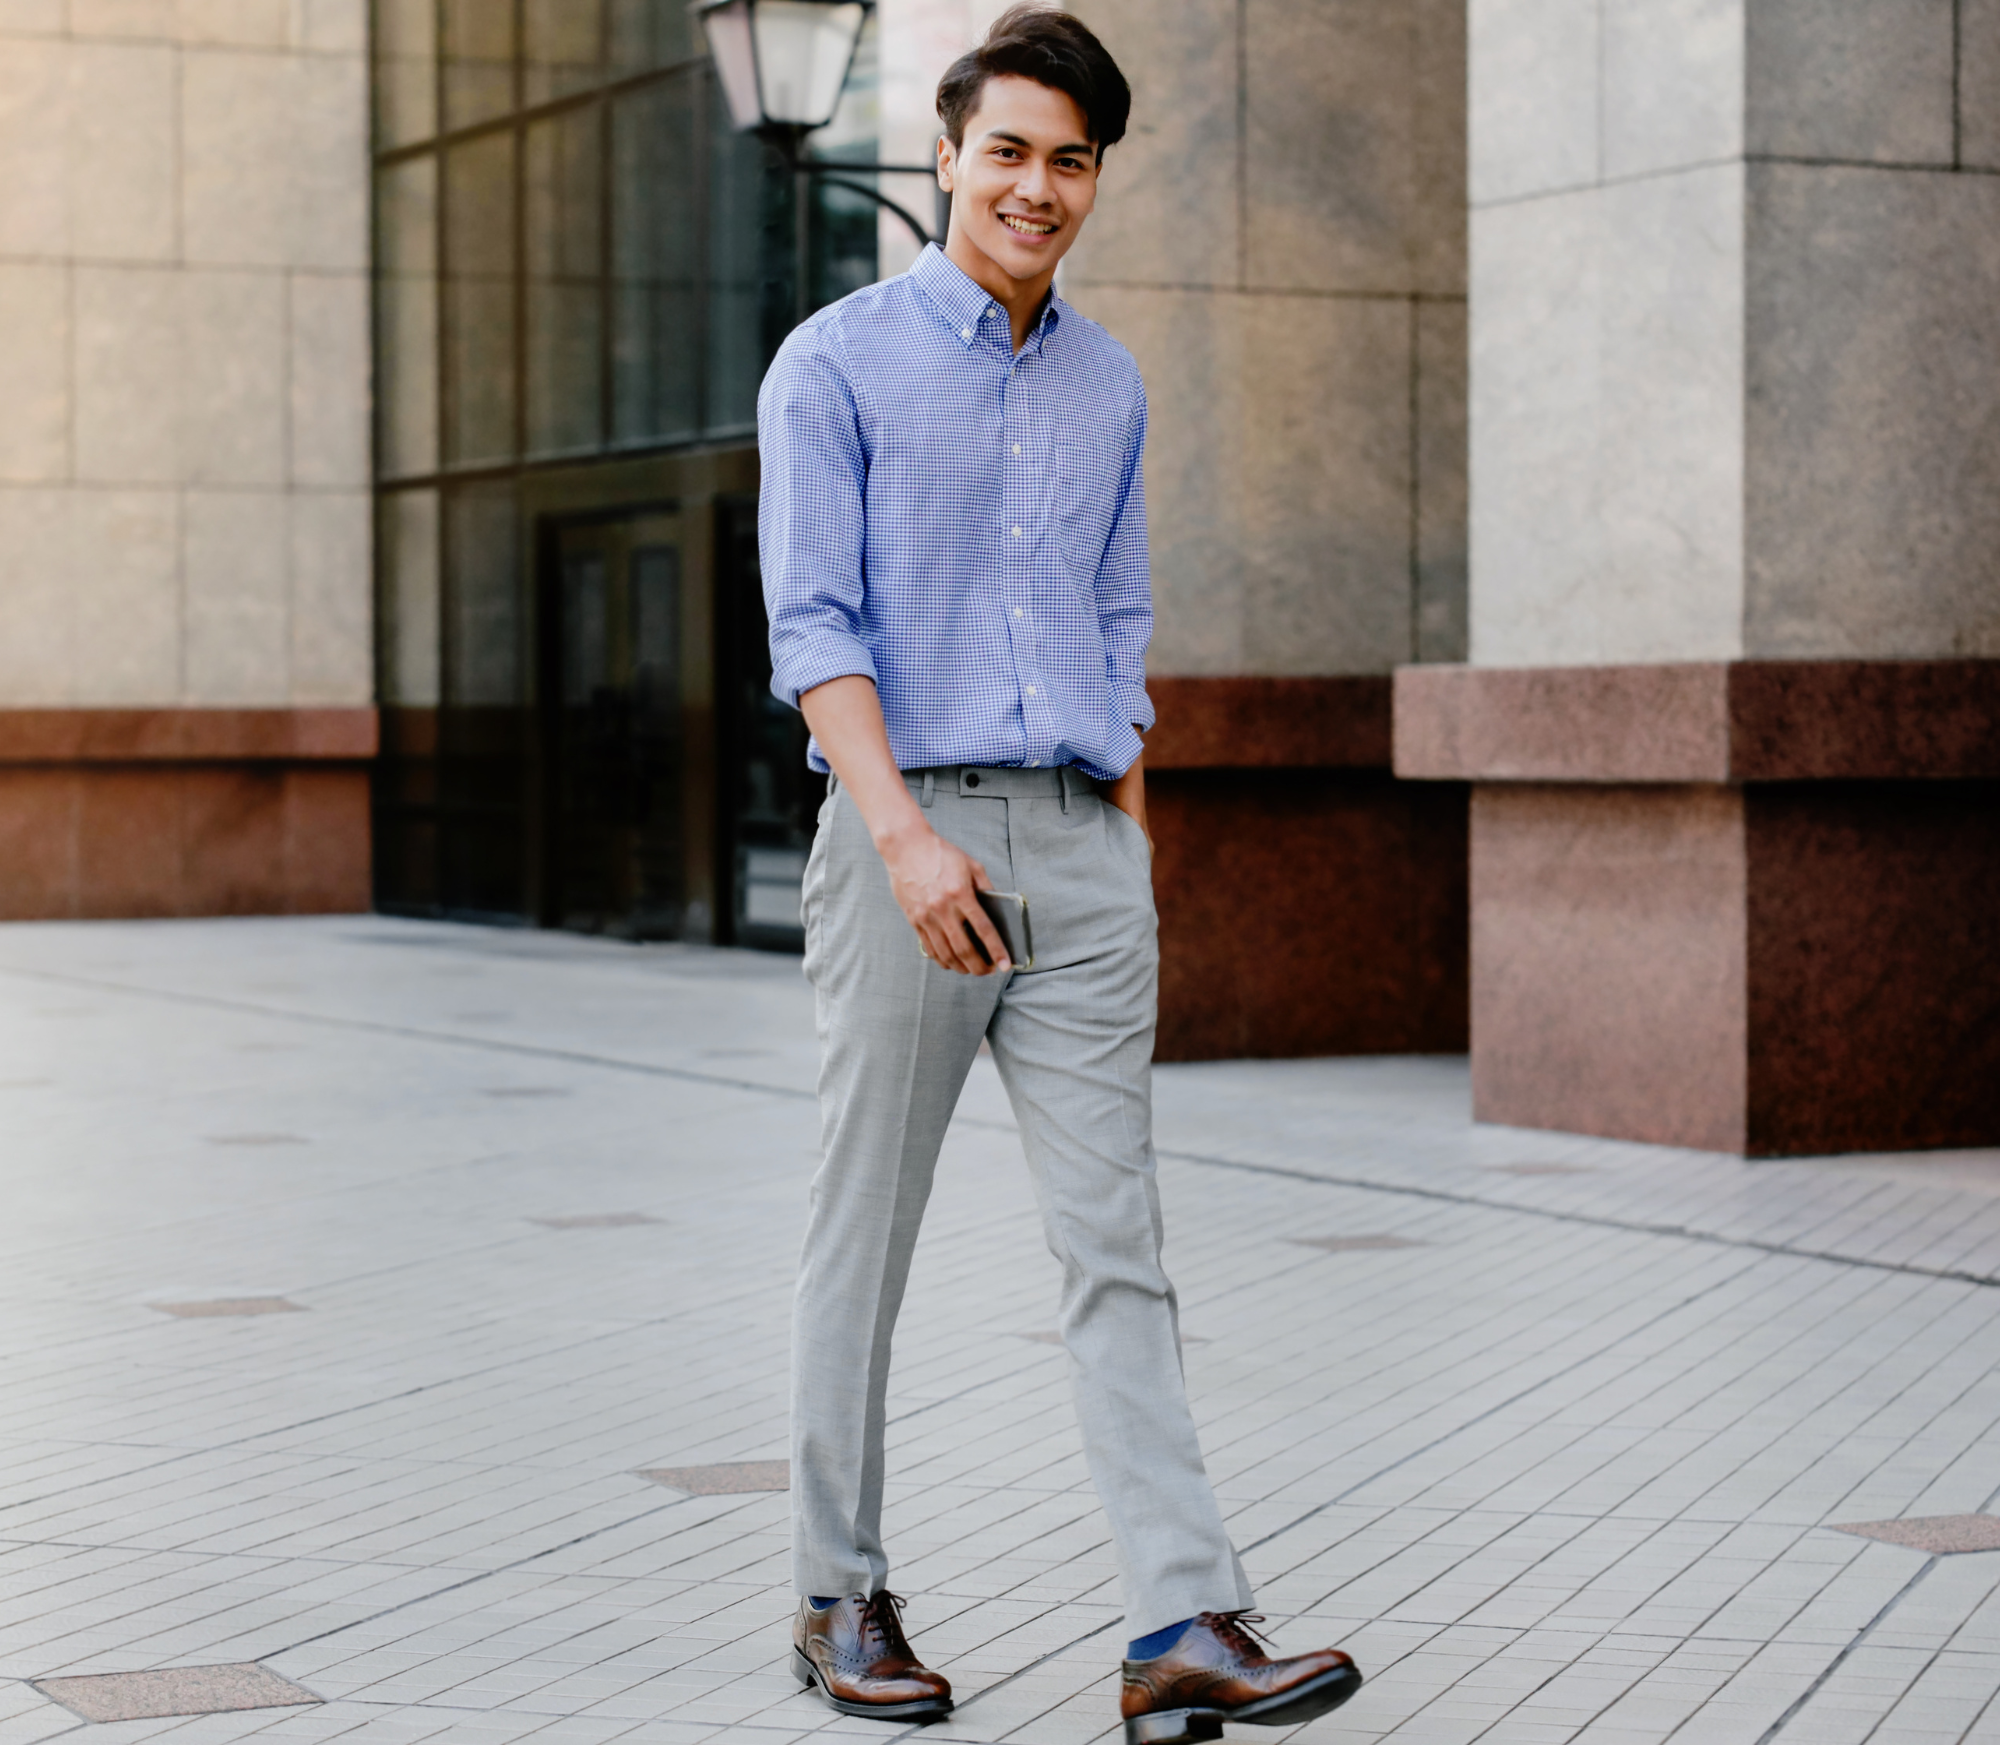 Stay Comfortable And Stylish At Formal Events With Calvin Klein Men's Slack Pants